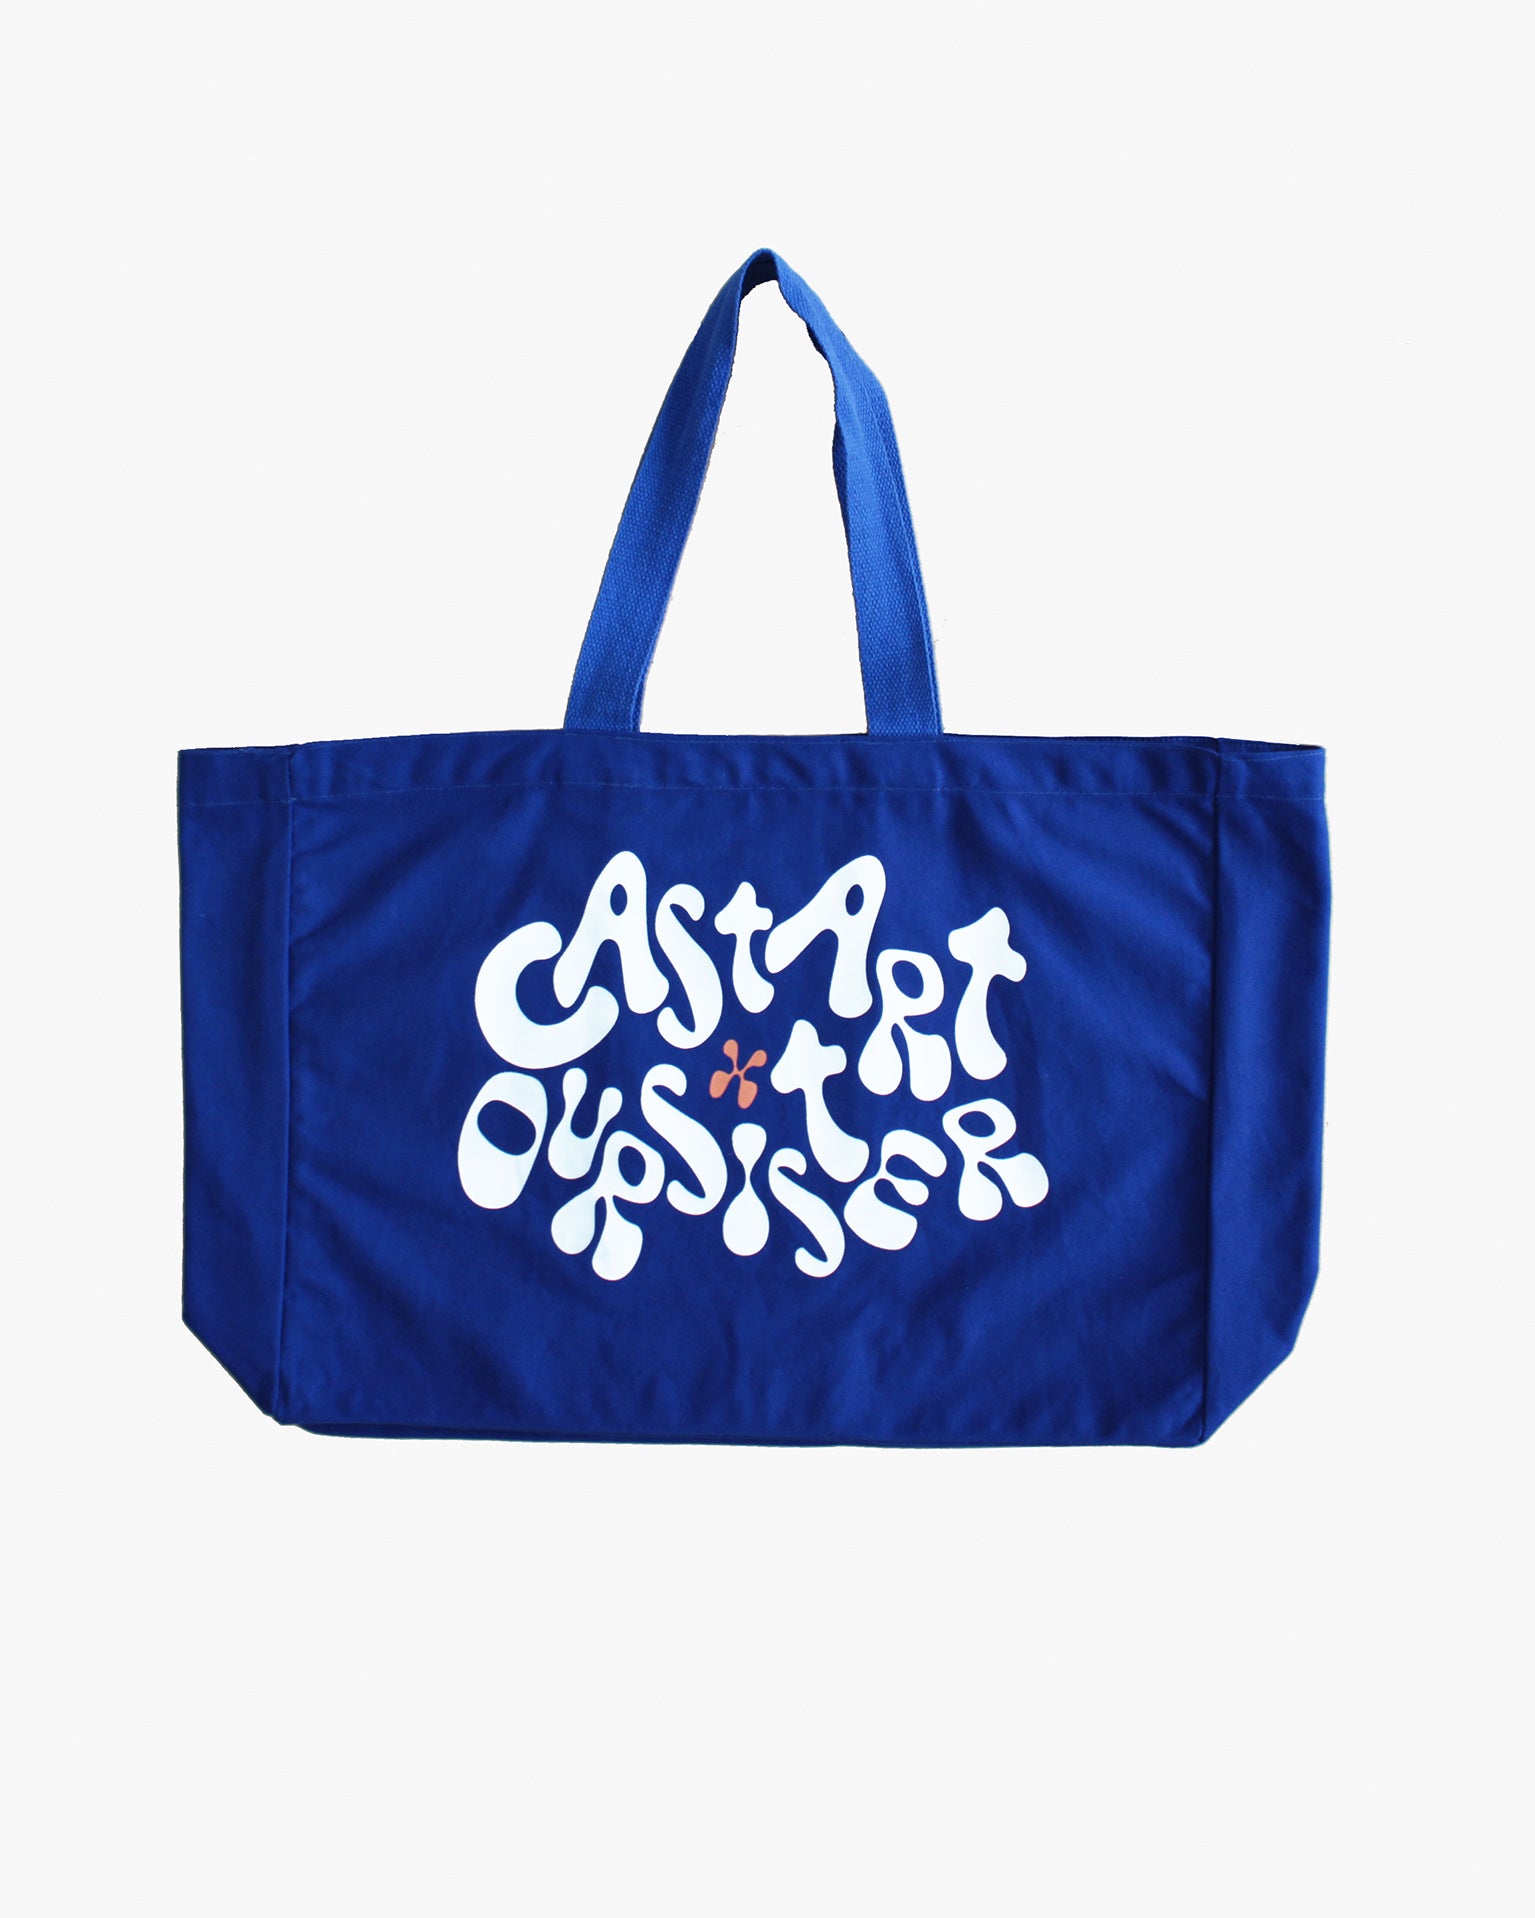 Castart x Our Sister - Tote bag Our Sister lifestyle Castart